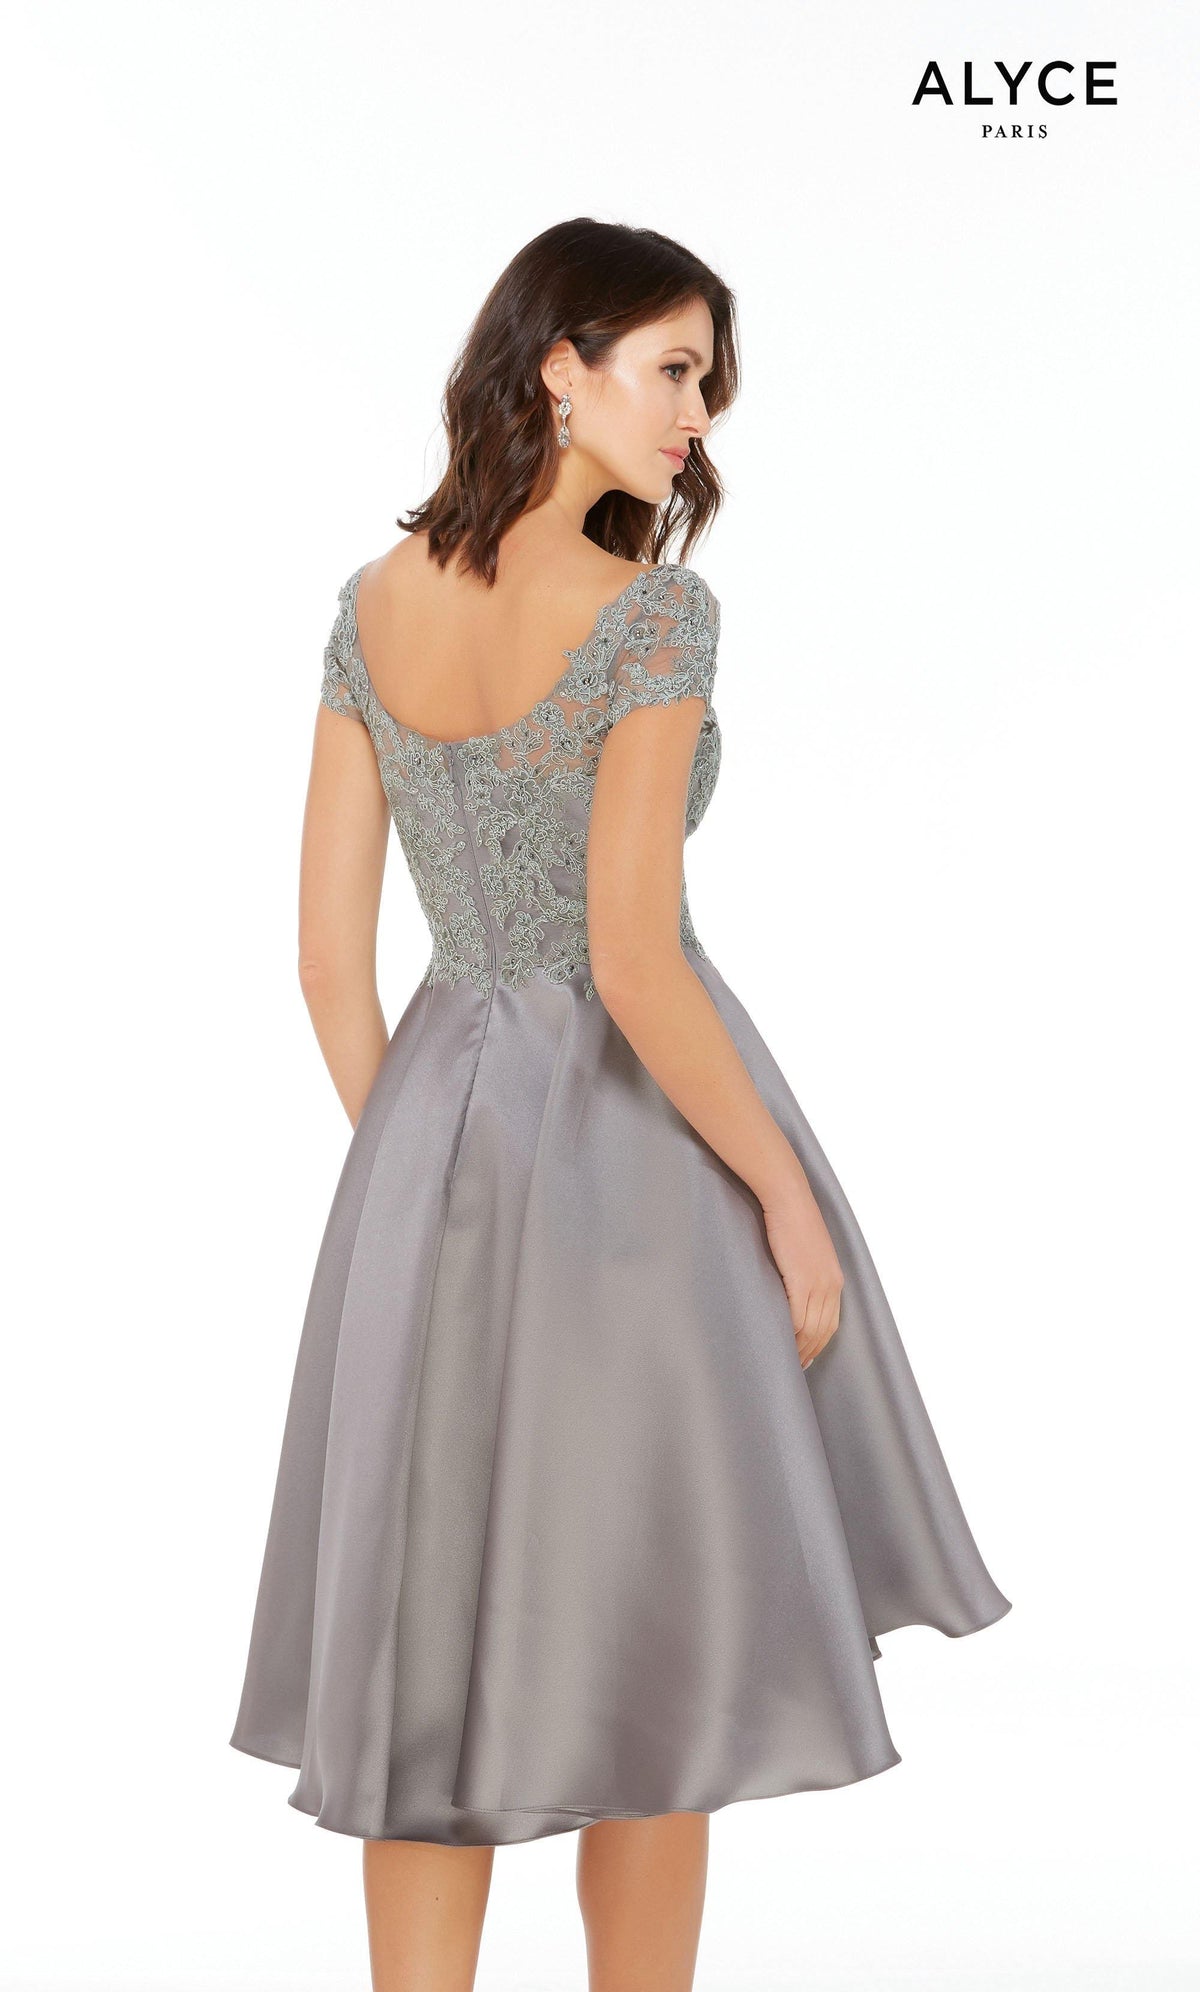 Grey Mikado high-low elegant mother of the bride dress with a scoop back, lace bodice, and short sleeves